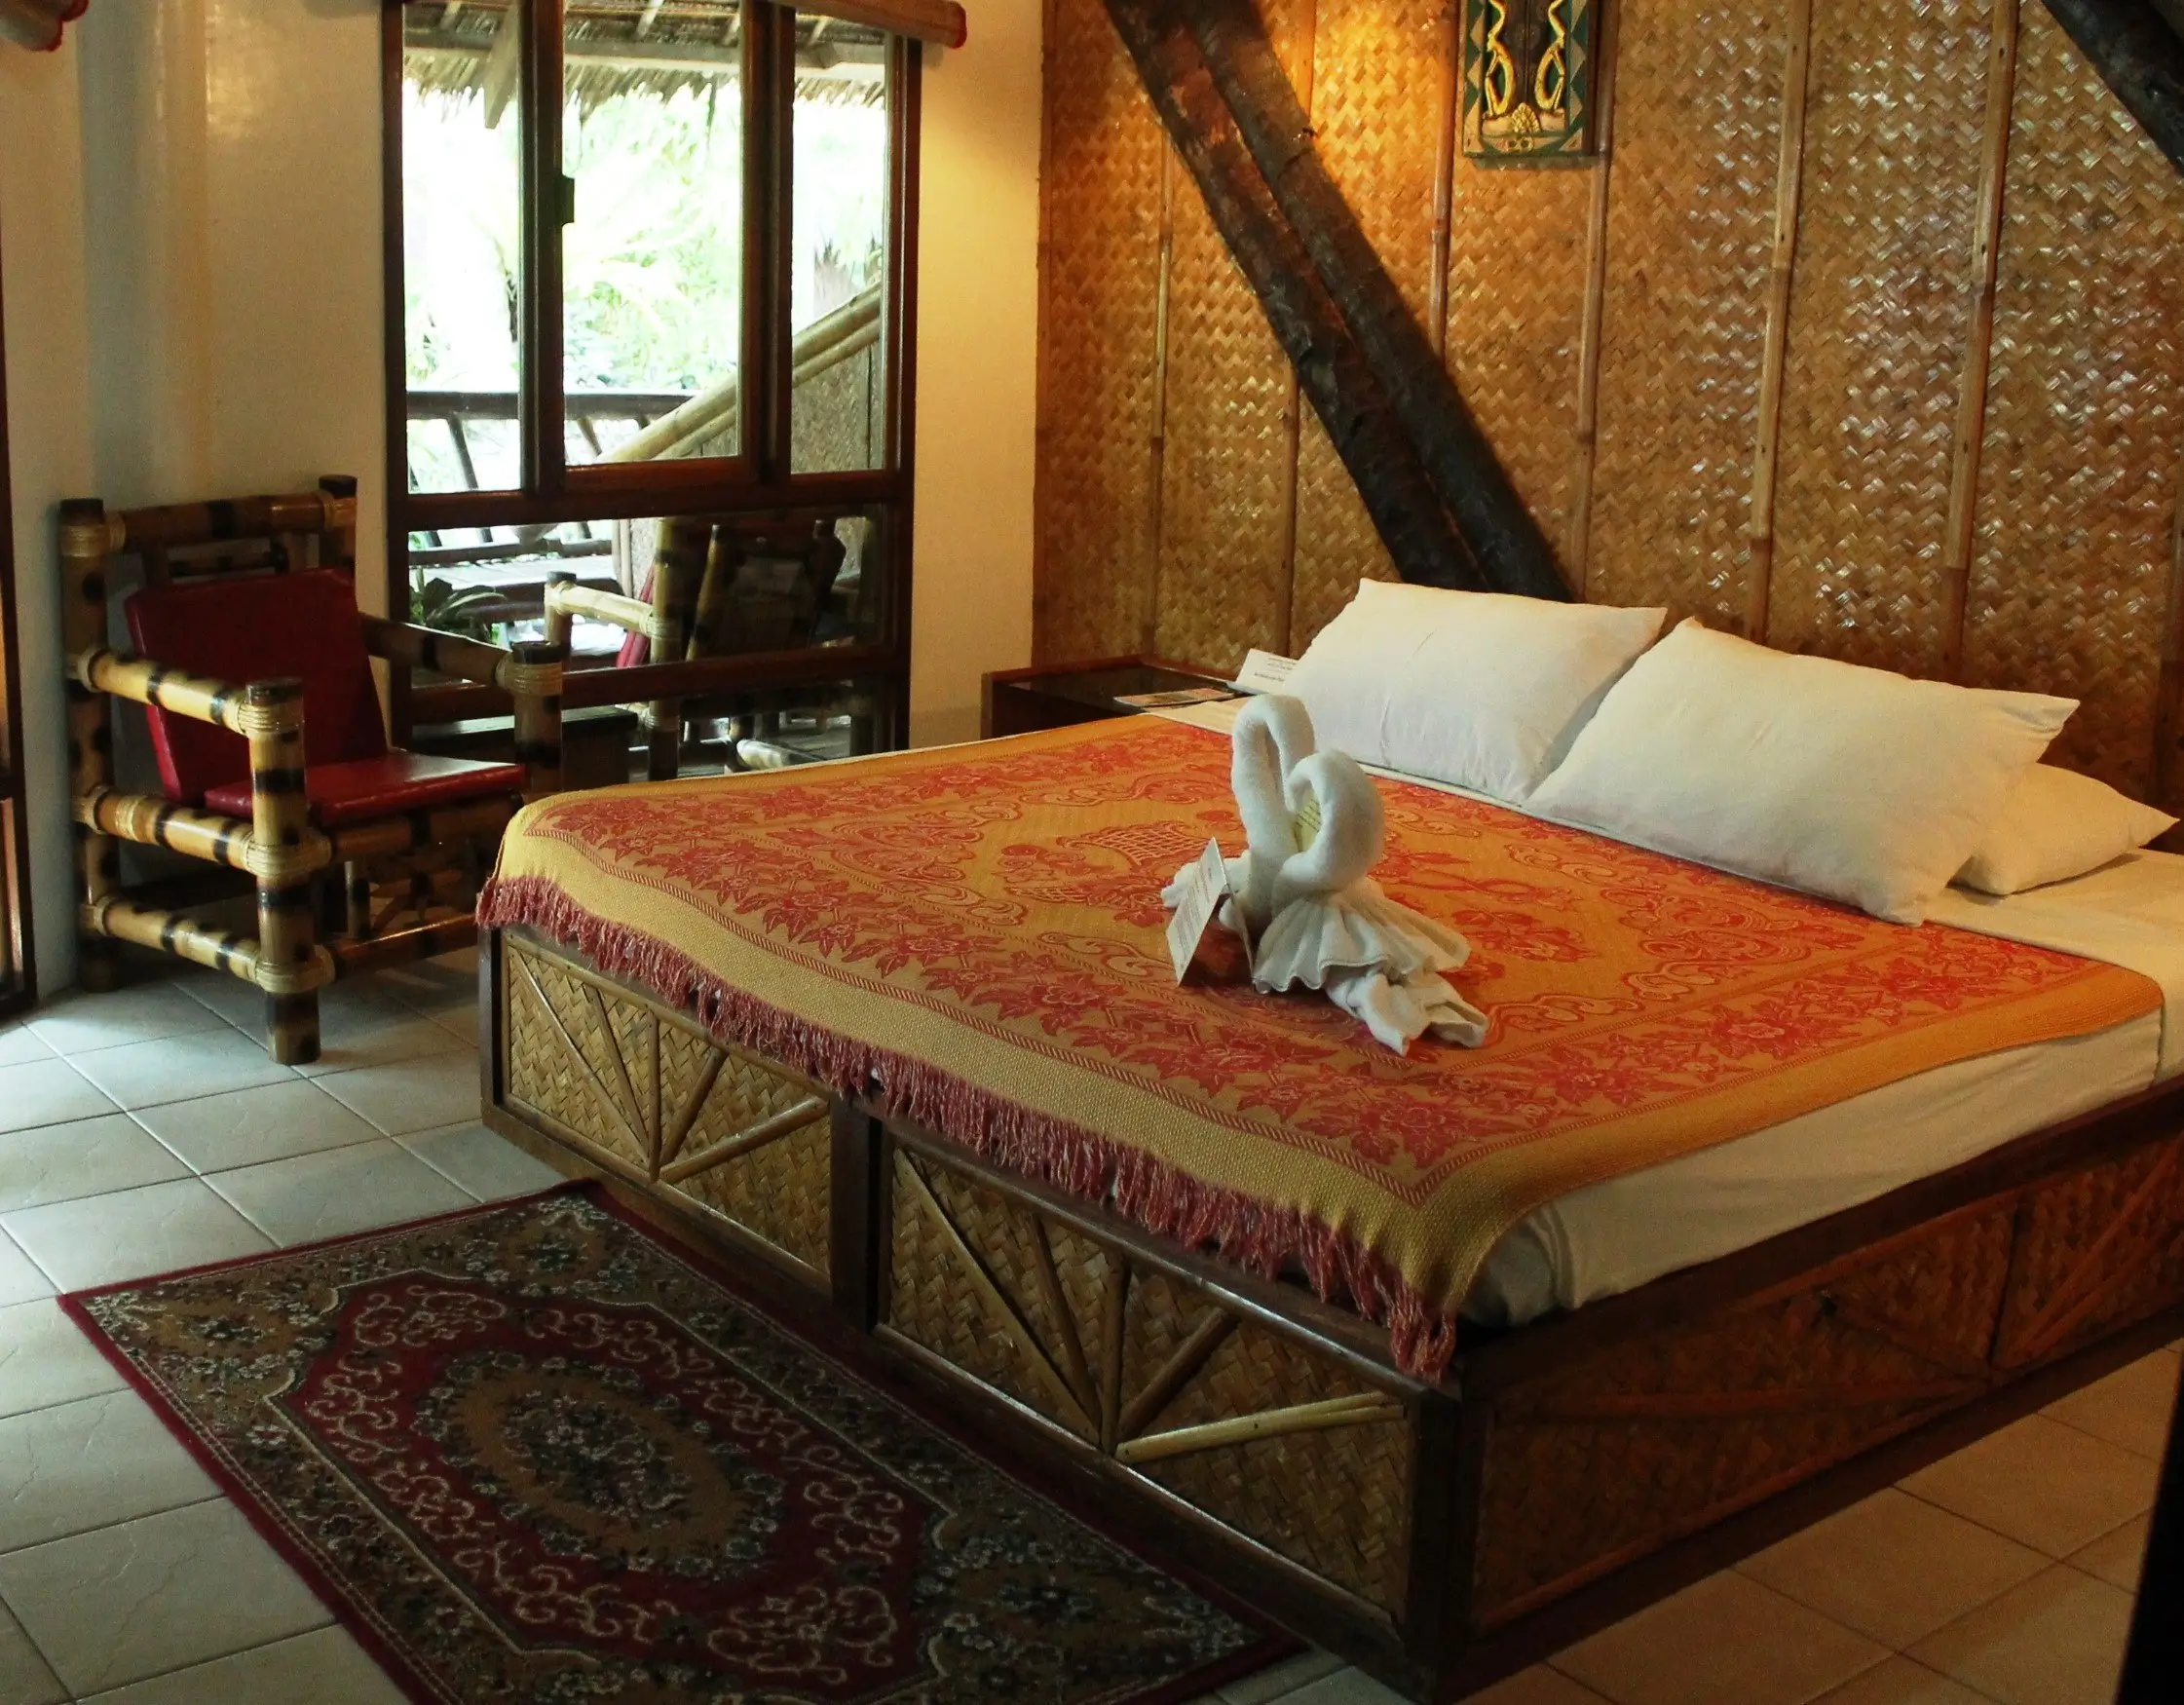 Cozy and inviting bedroom at Nigi Nigi Nu Noos Hotel in Boracay, featuring a bed with a red and gold patterned coverlet and white pillows.